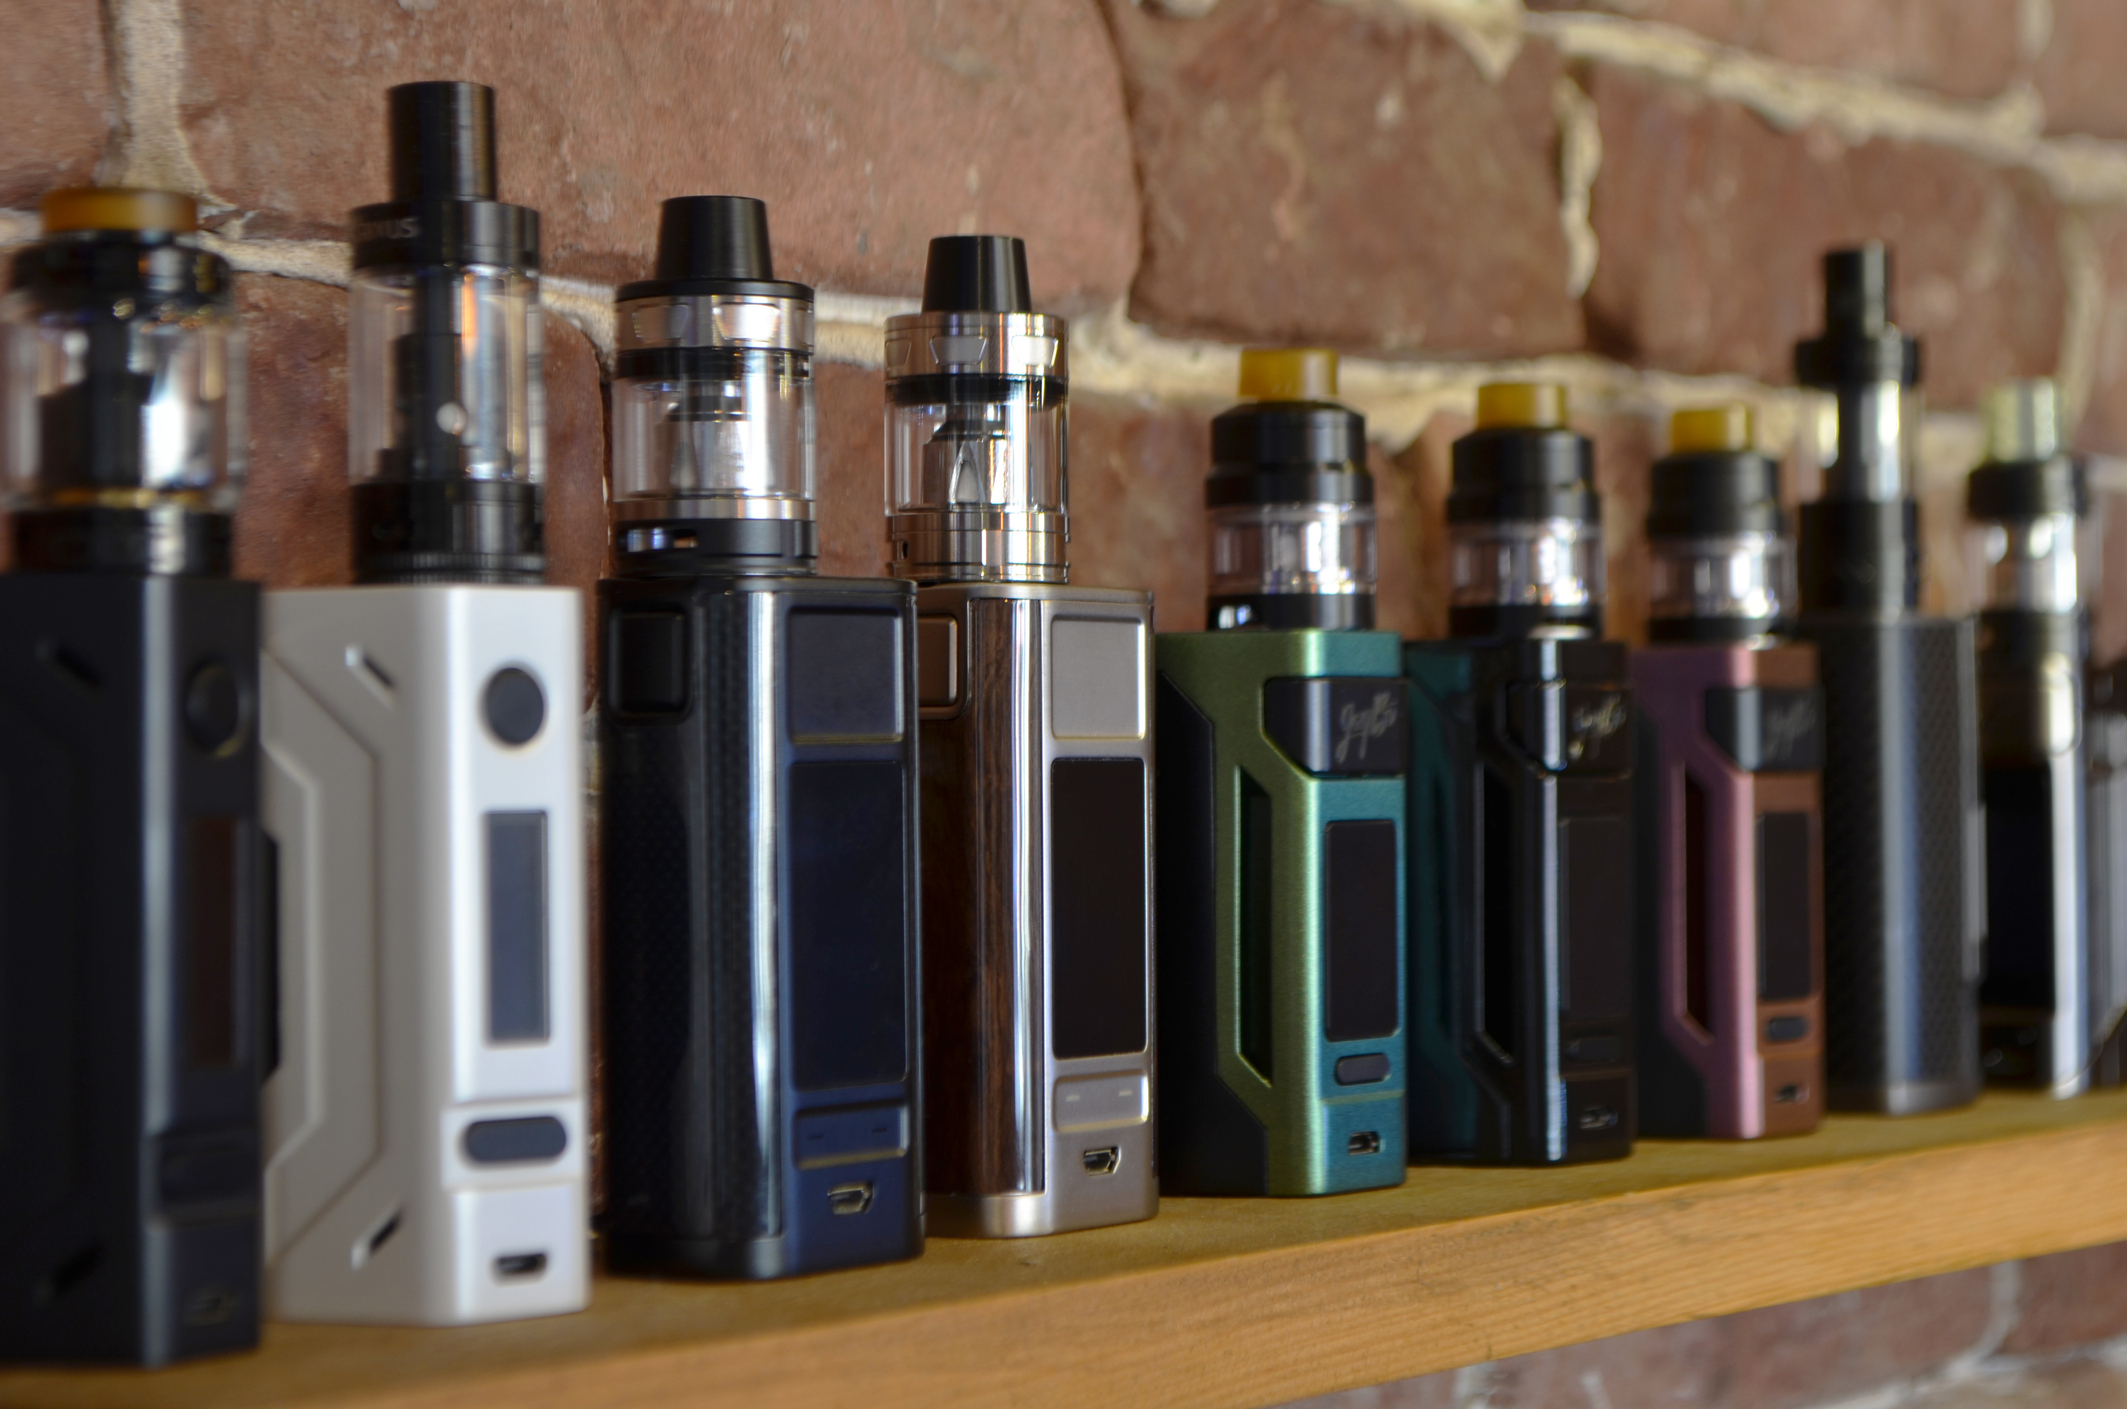 Latest guidance issued by FDA on requirements for US Vape Shops